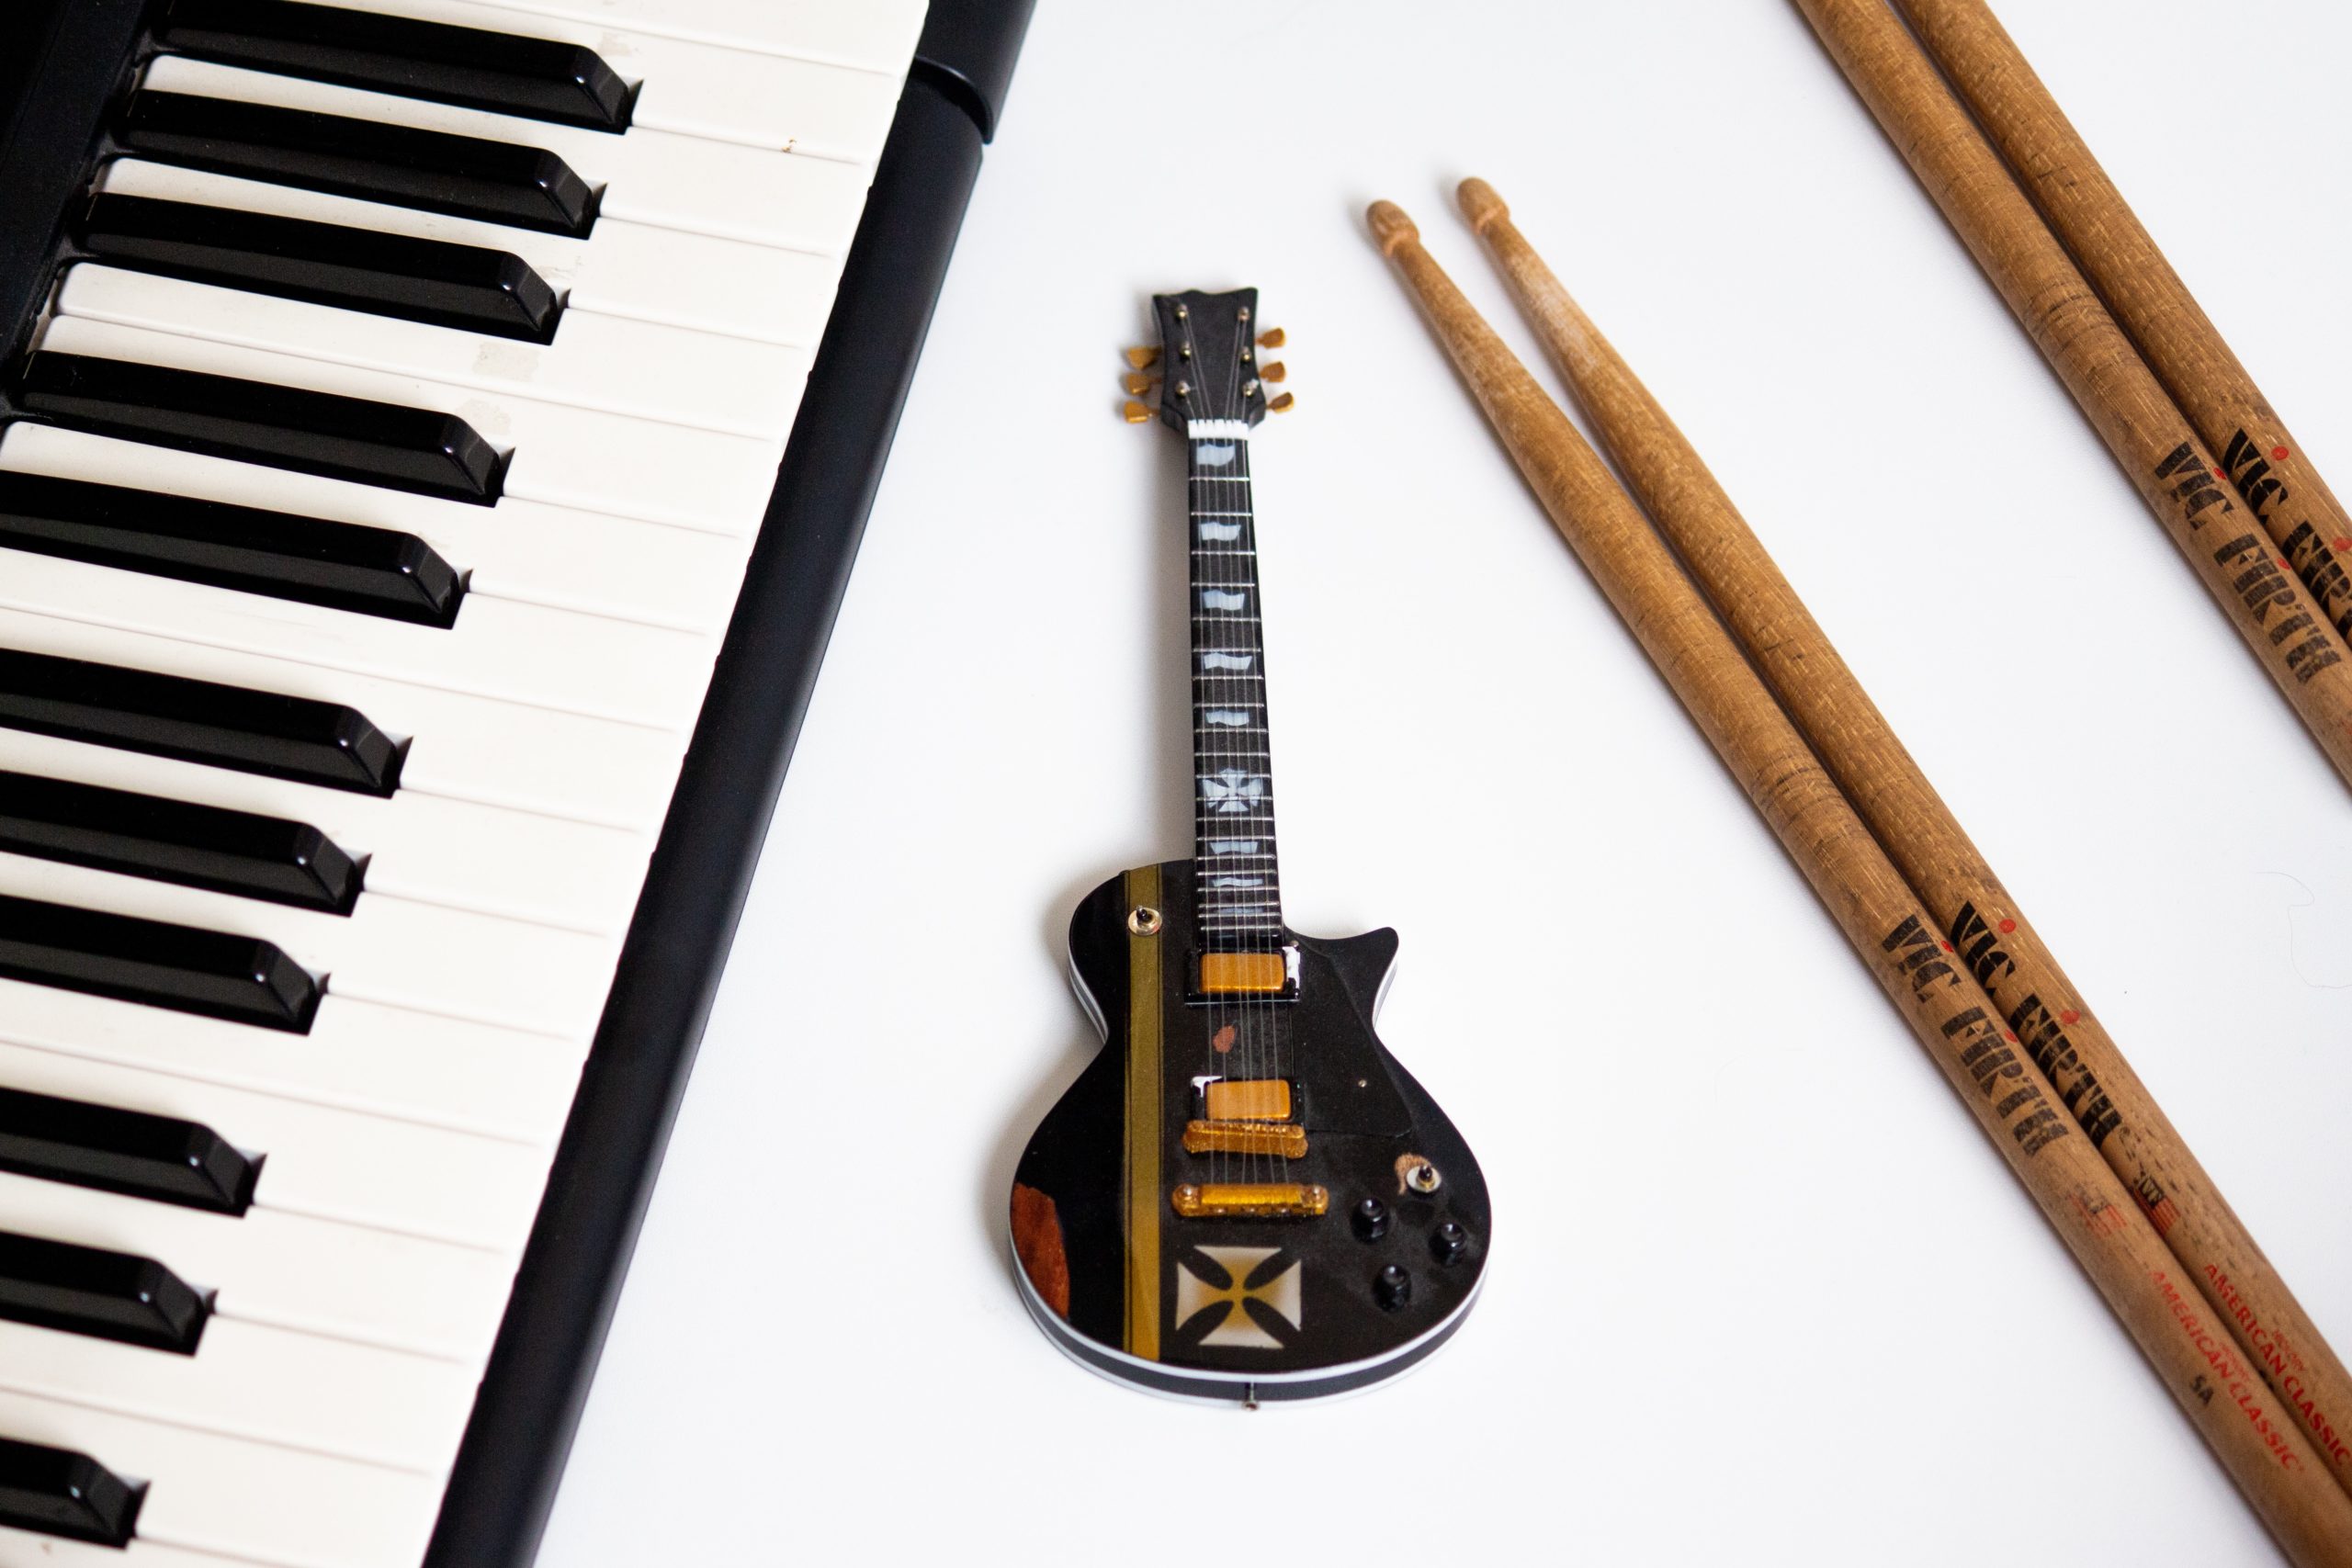 Top 6 Easy to Learn Musical Instruments for Beginners 2019